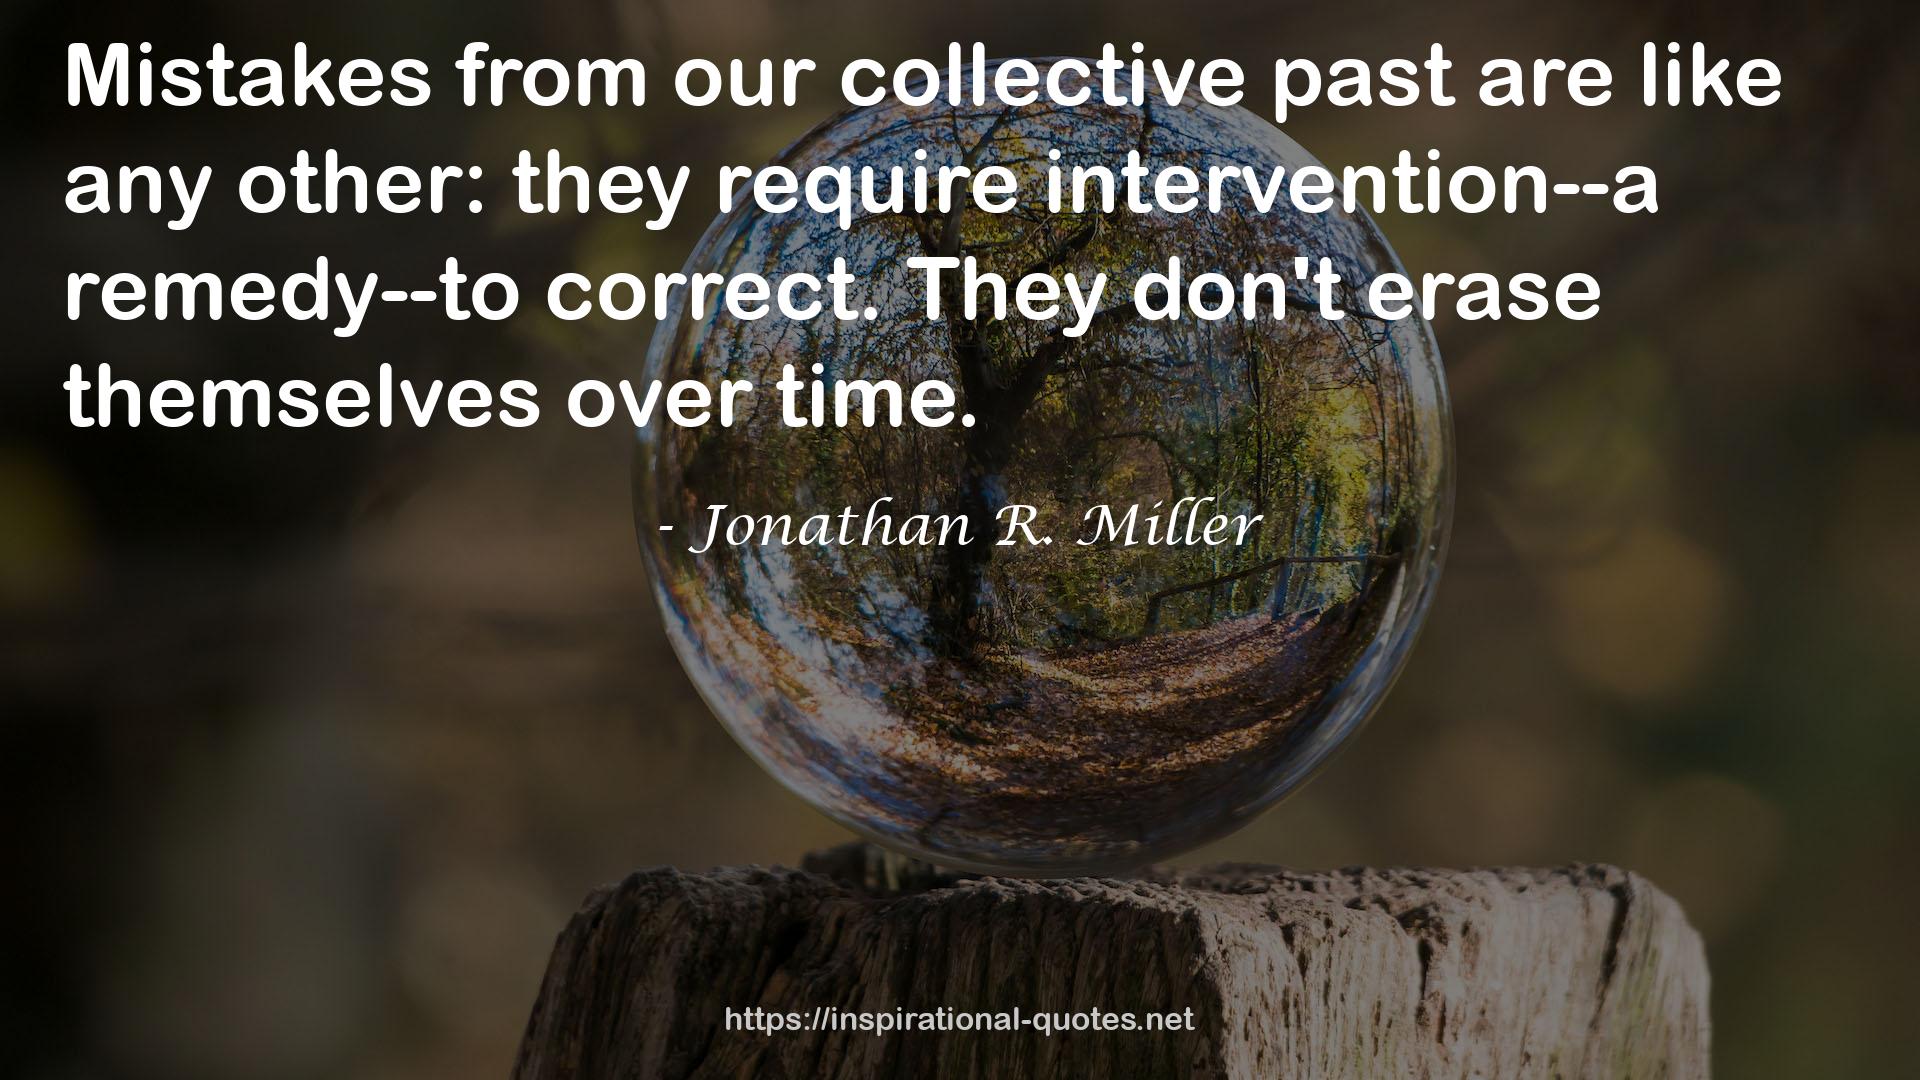 Jonathan R. Miller QUOTES